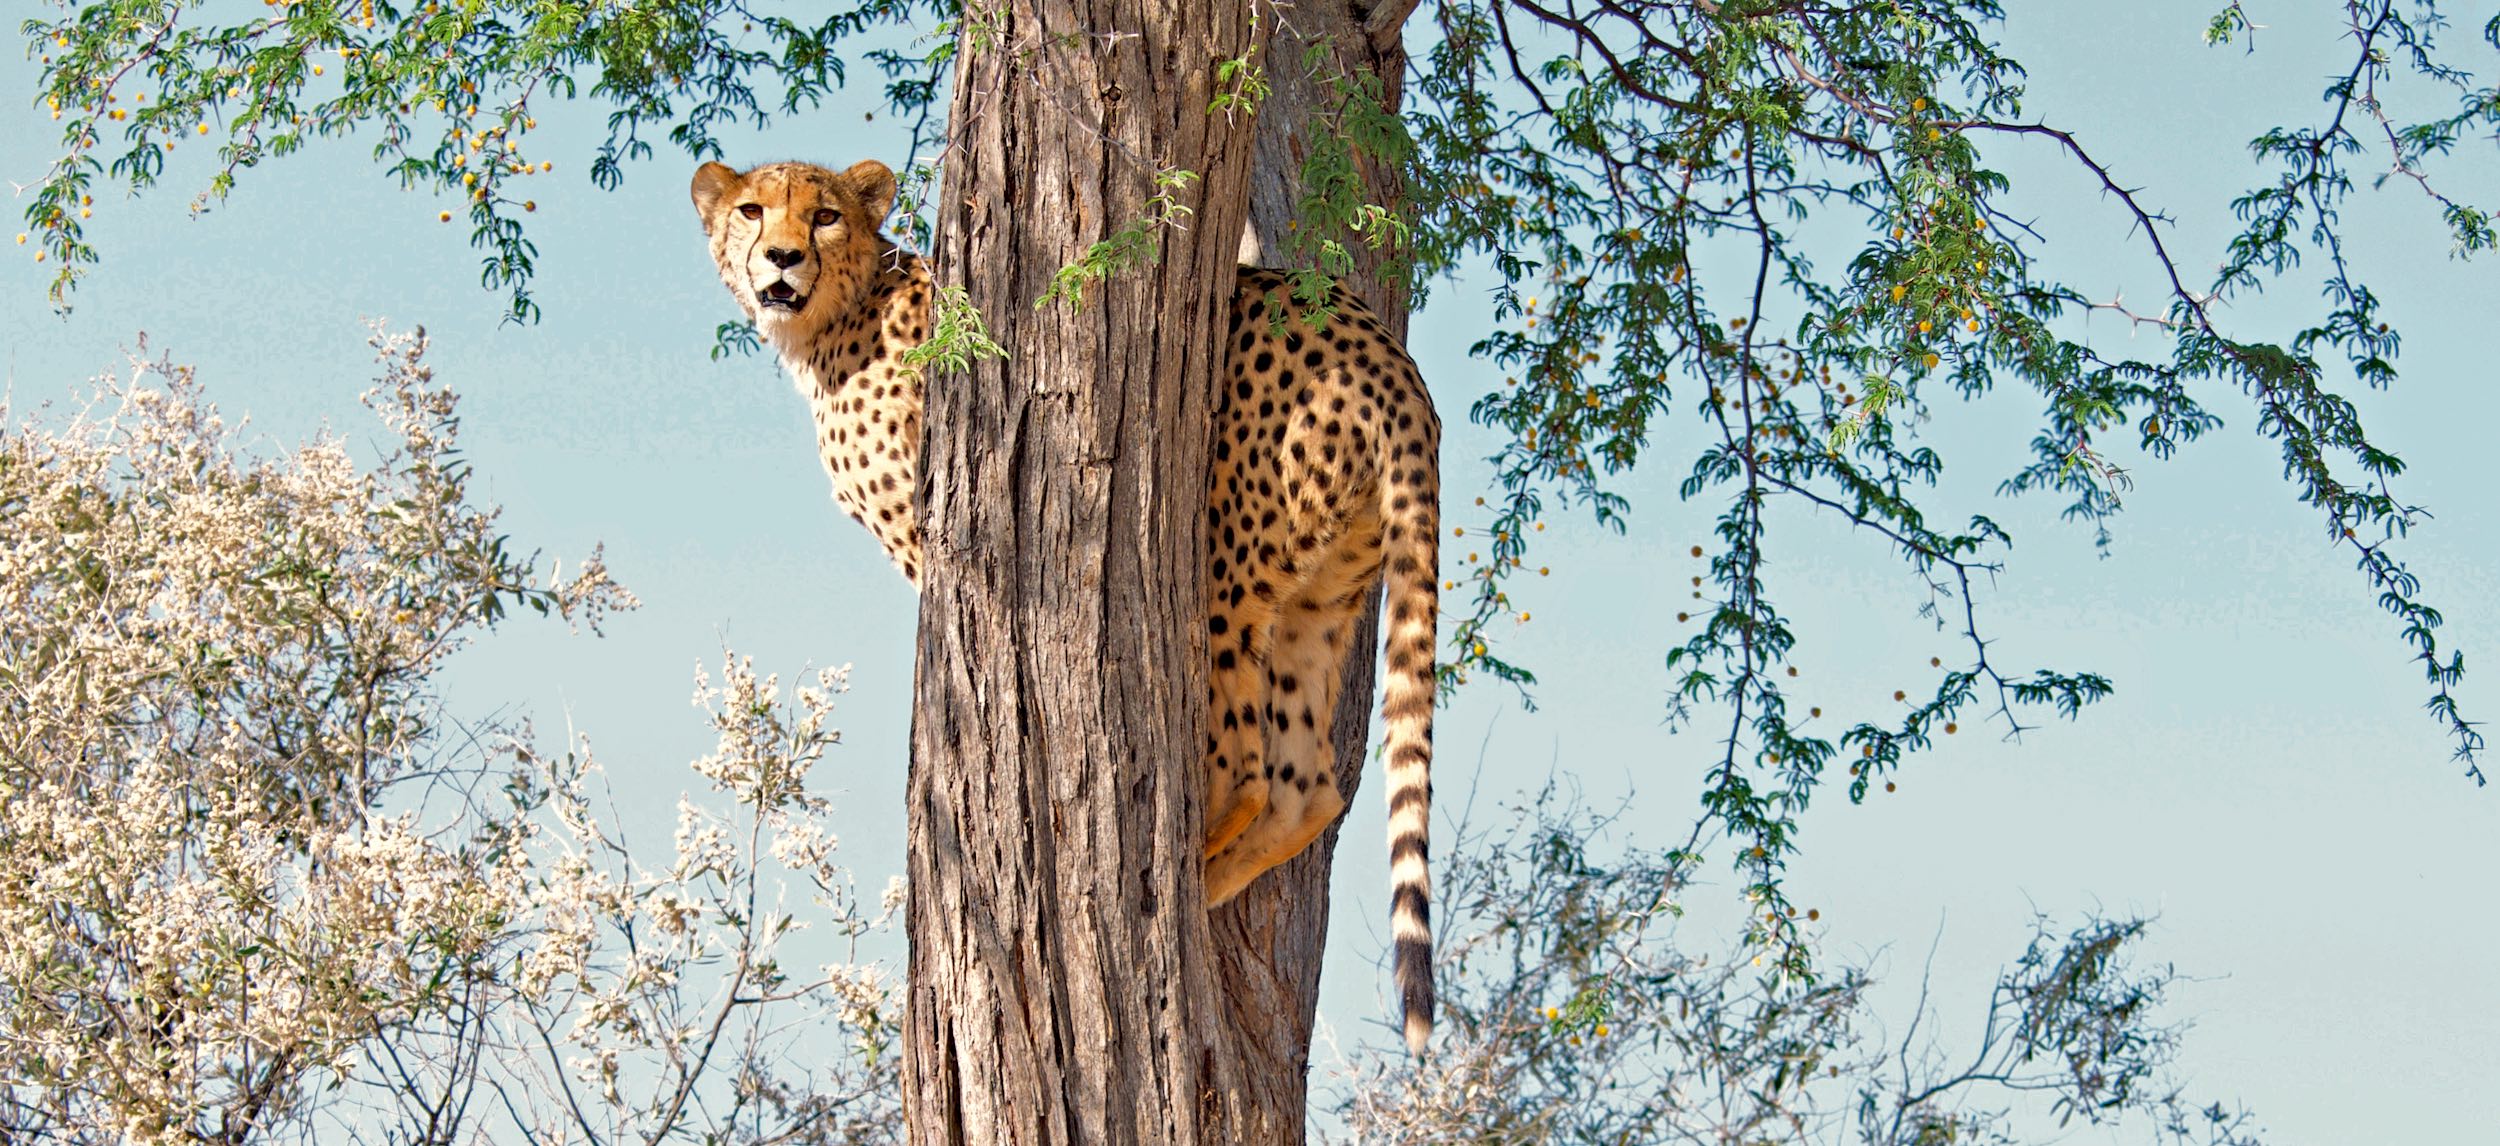 A cheetah looks down from the tree she is standing in.